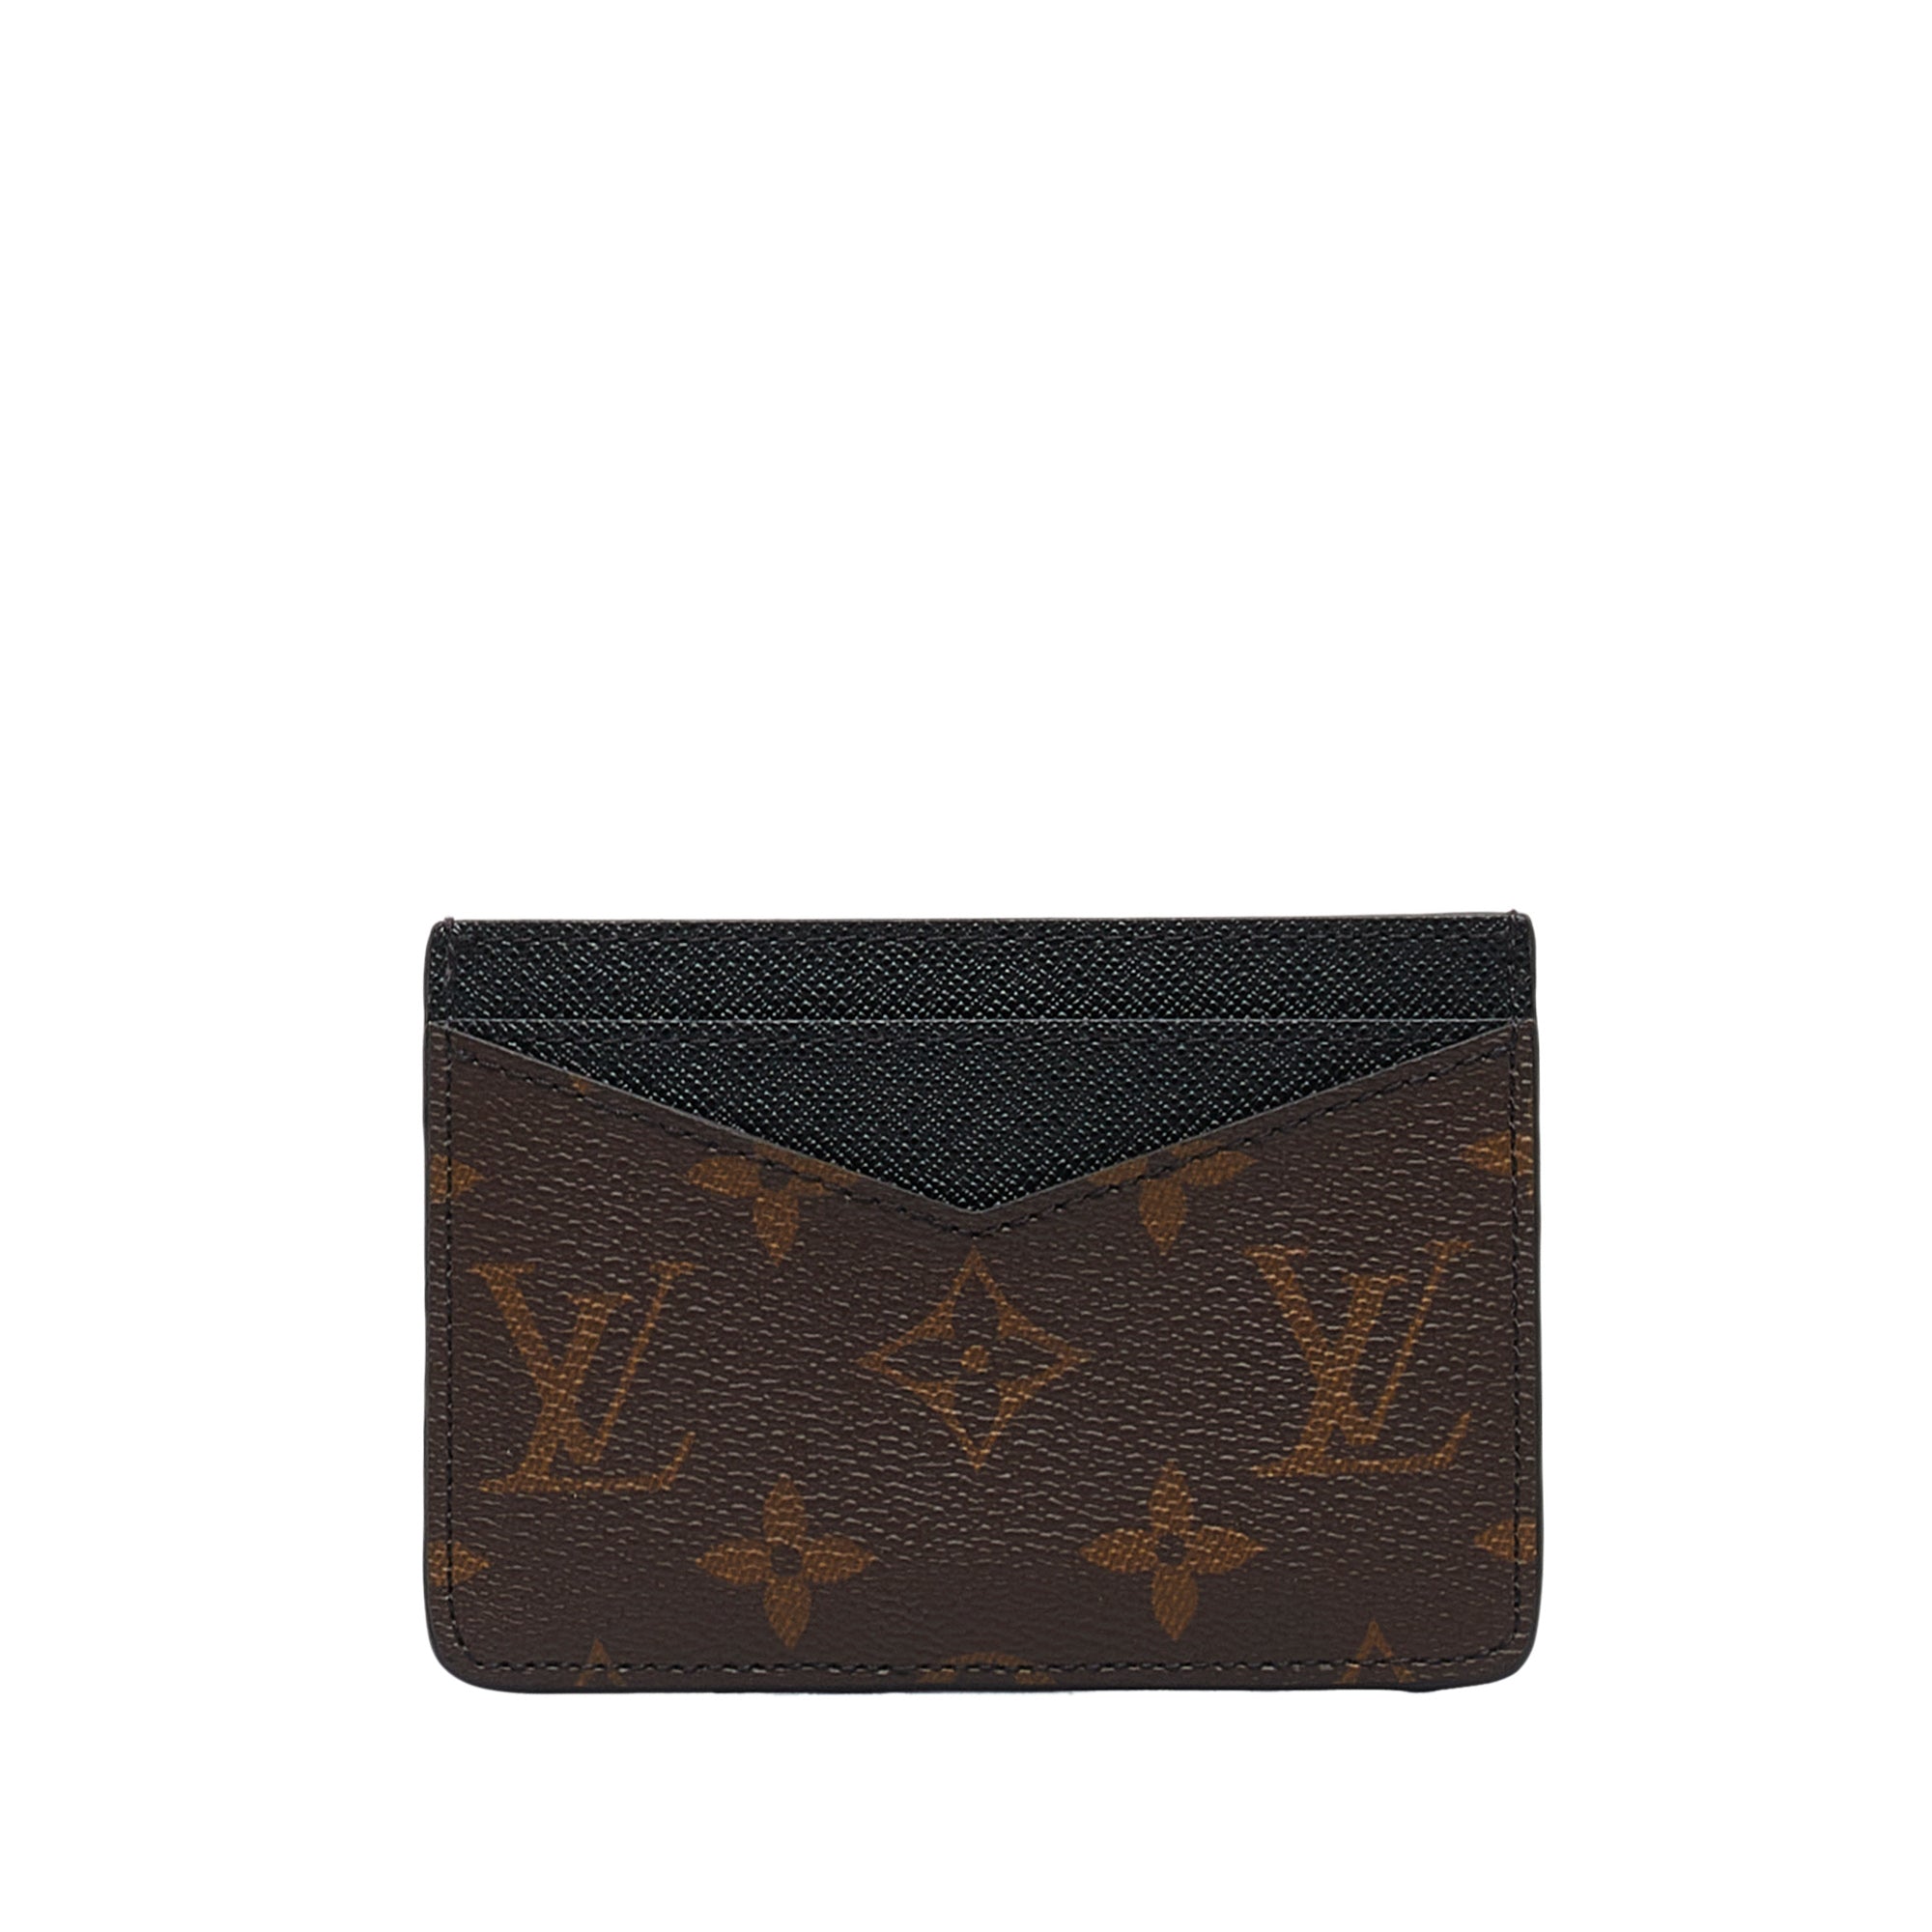 Louis Vuitton - Authenticated Emilie Wallet - Cloth Brown For Woman, Very Good Condition